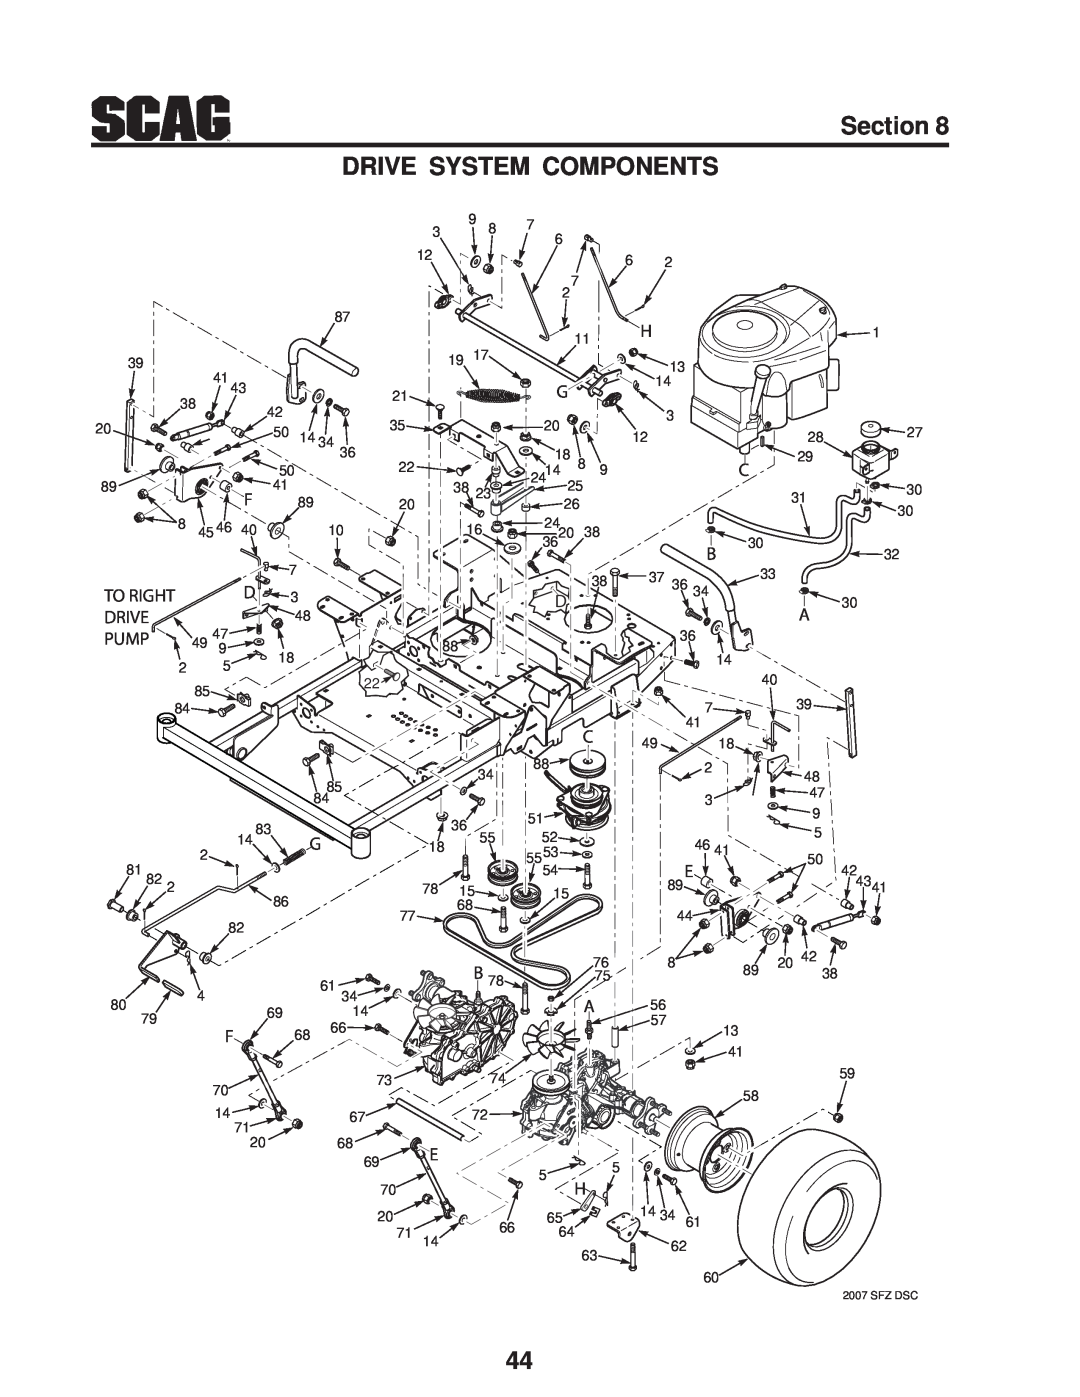 Scag Power Equipment SFZ manual Section DRIVE SYSTEM COMPONENTS, Drive, Pump, To Right, Sfz Dsc 